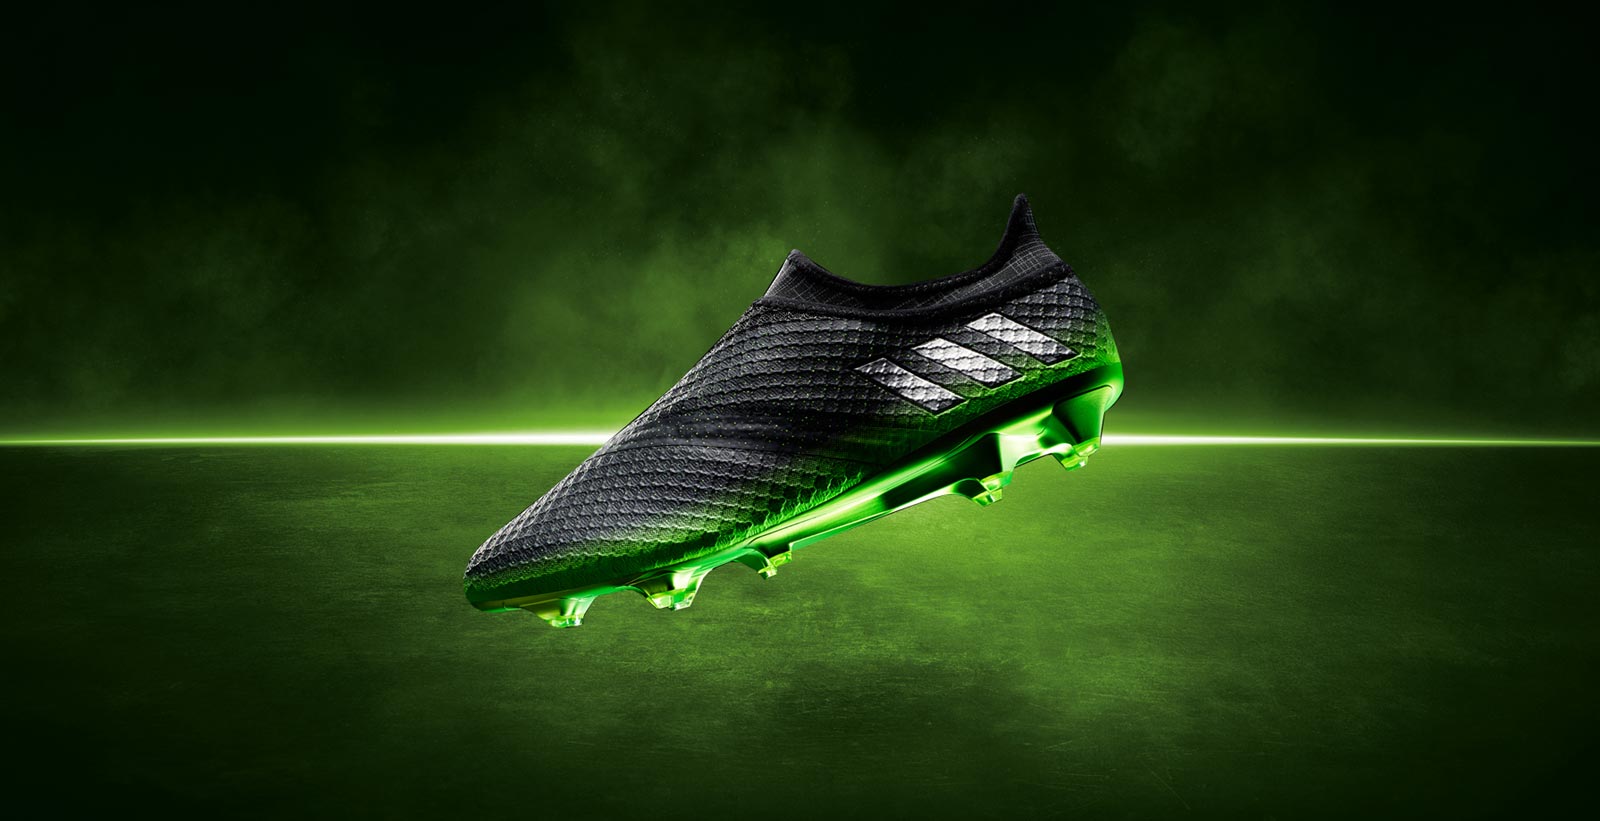 Adidas Messi Pureagility Space Dust Boots Released